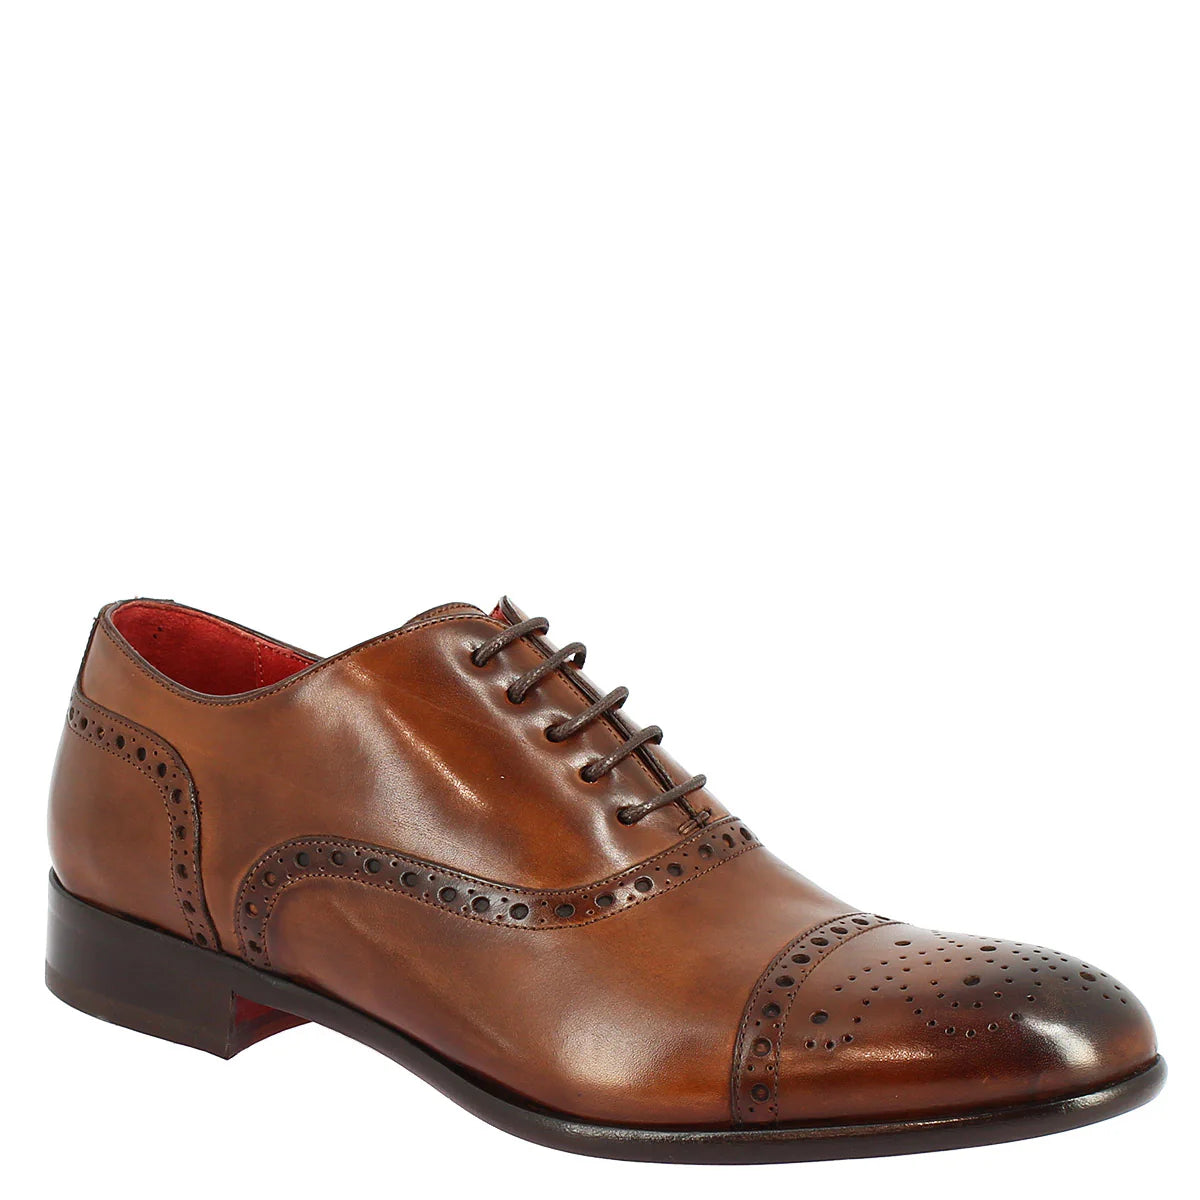 Brandy Leather Brogues Shoes